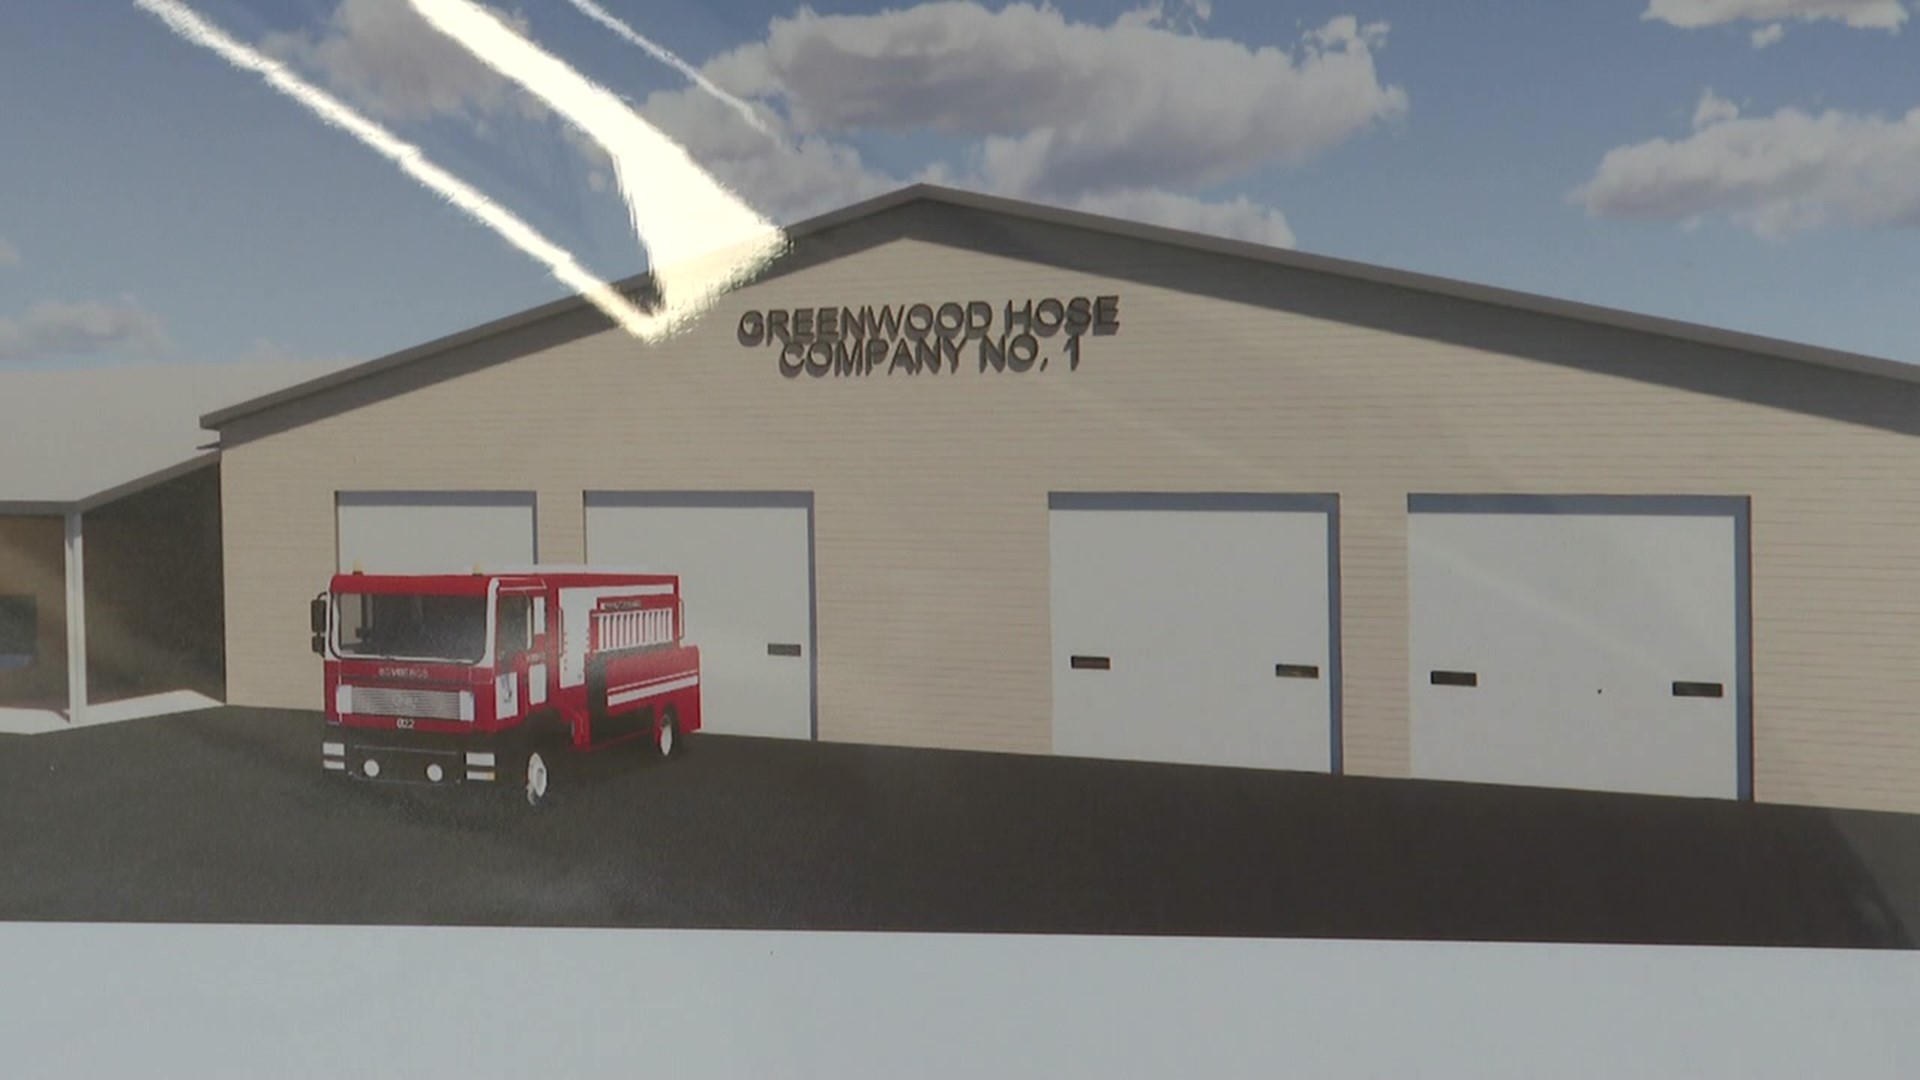 A combined fire and police facility will be built at the location of the Greenwood Hose Company.